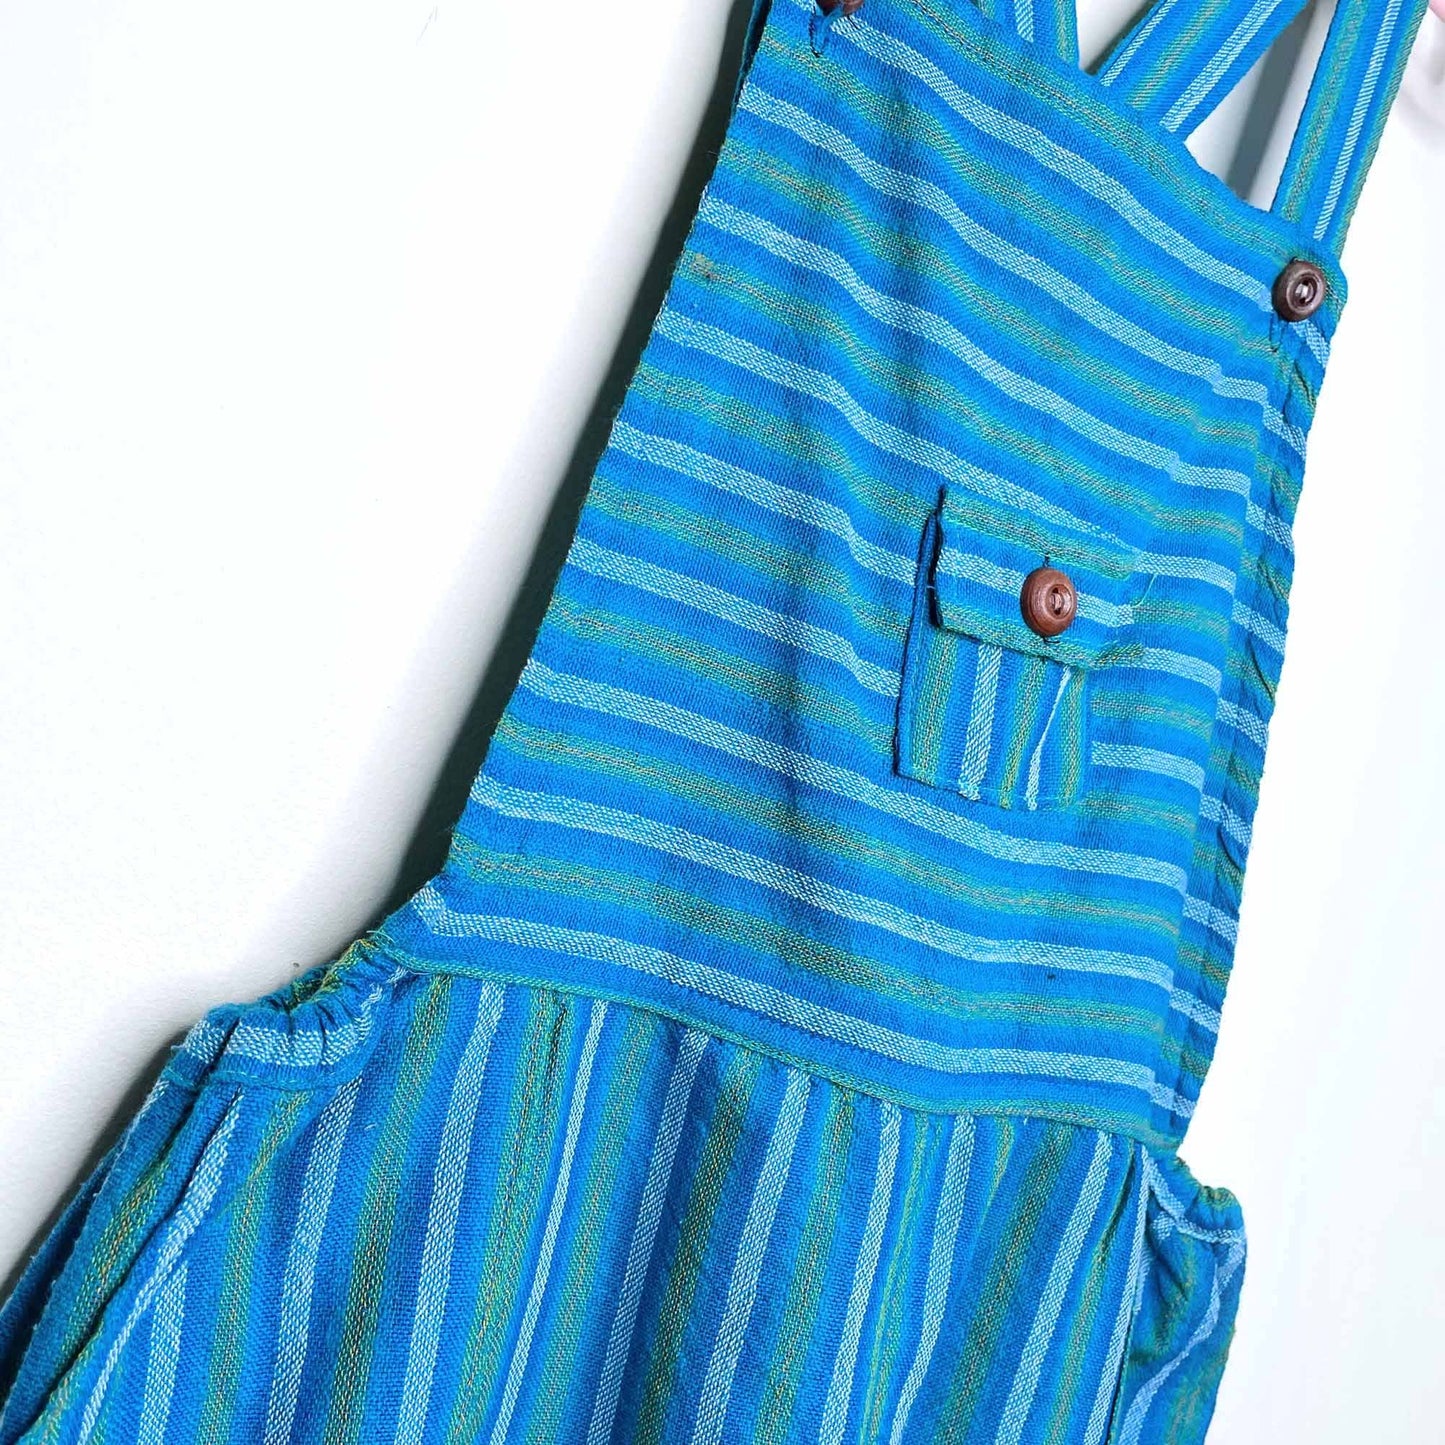 boho striped hand-woven overalls - large